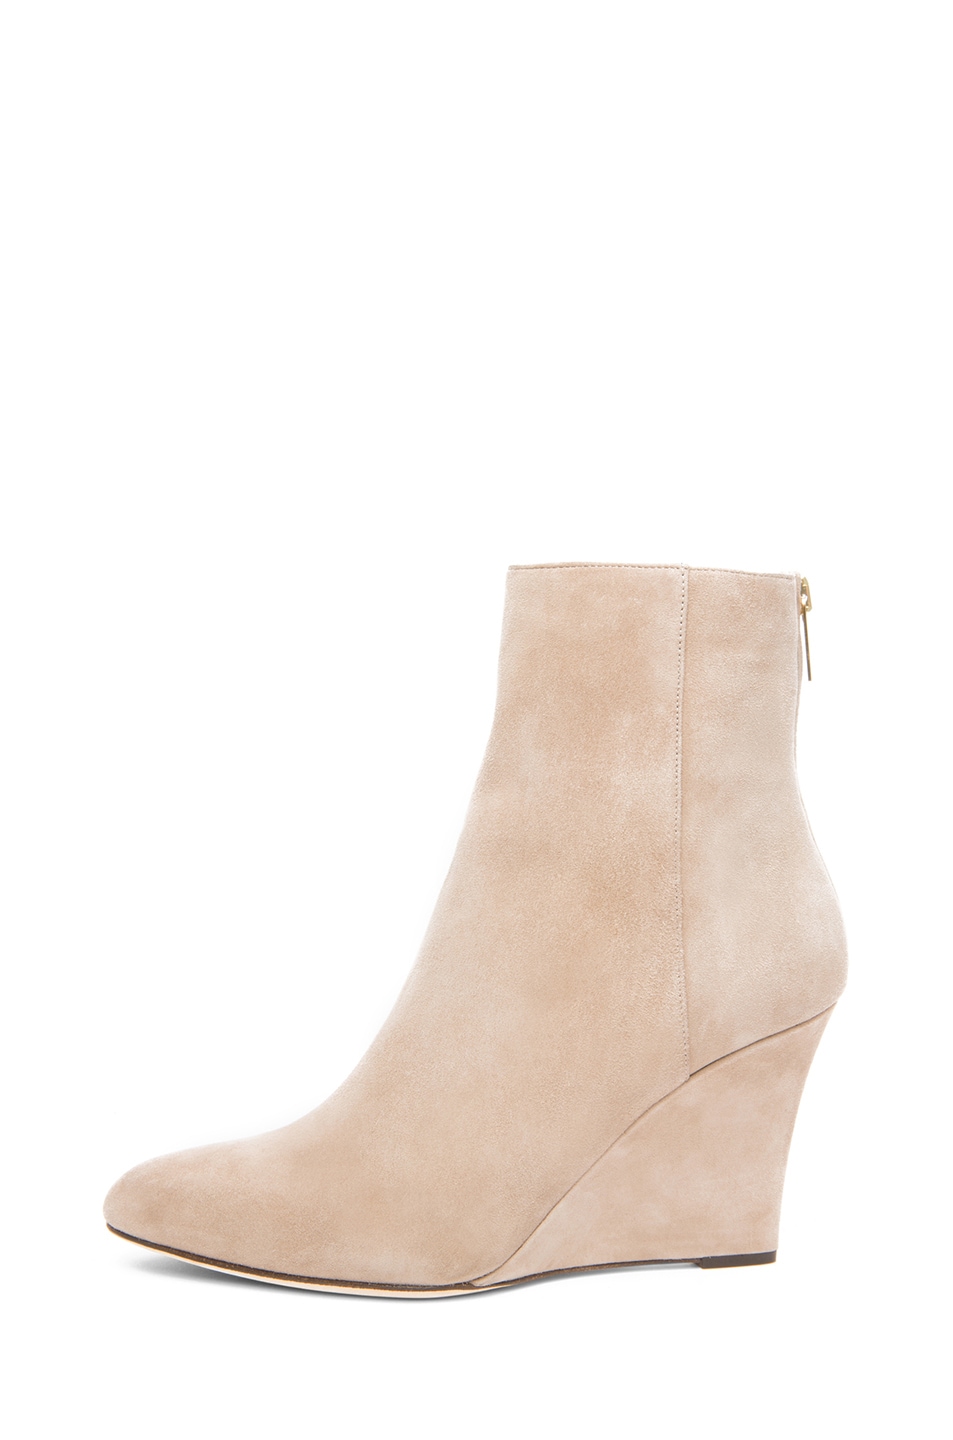 Image 1 of Jimmy Choo Mayor Suede 85mm Wedge Ankle Boots in Latte